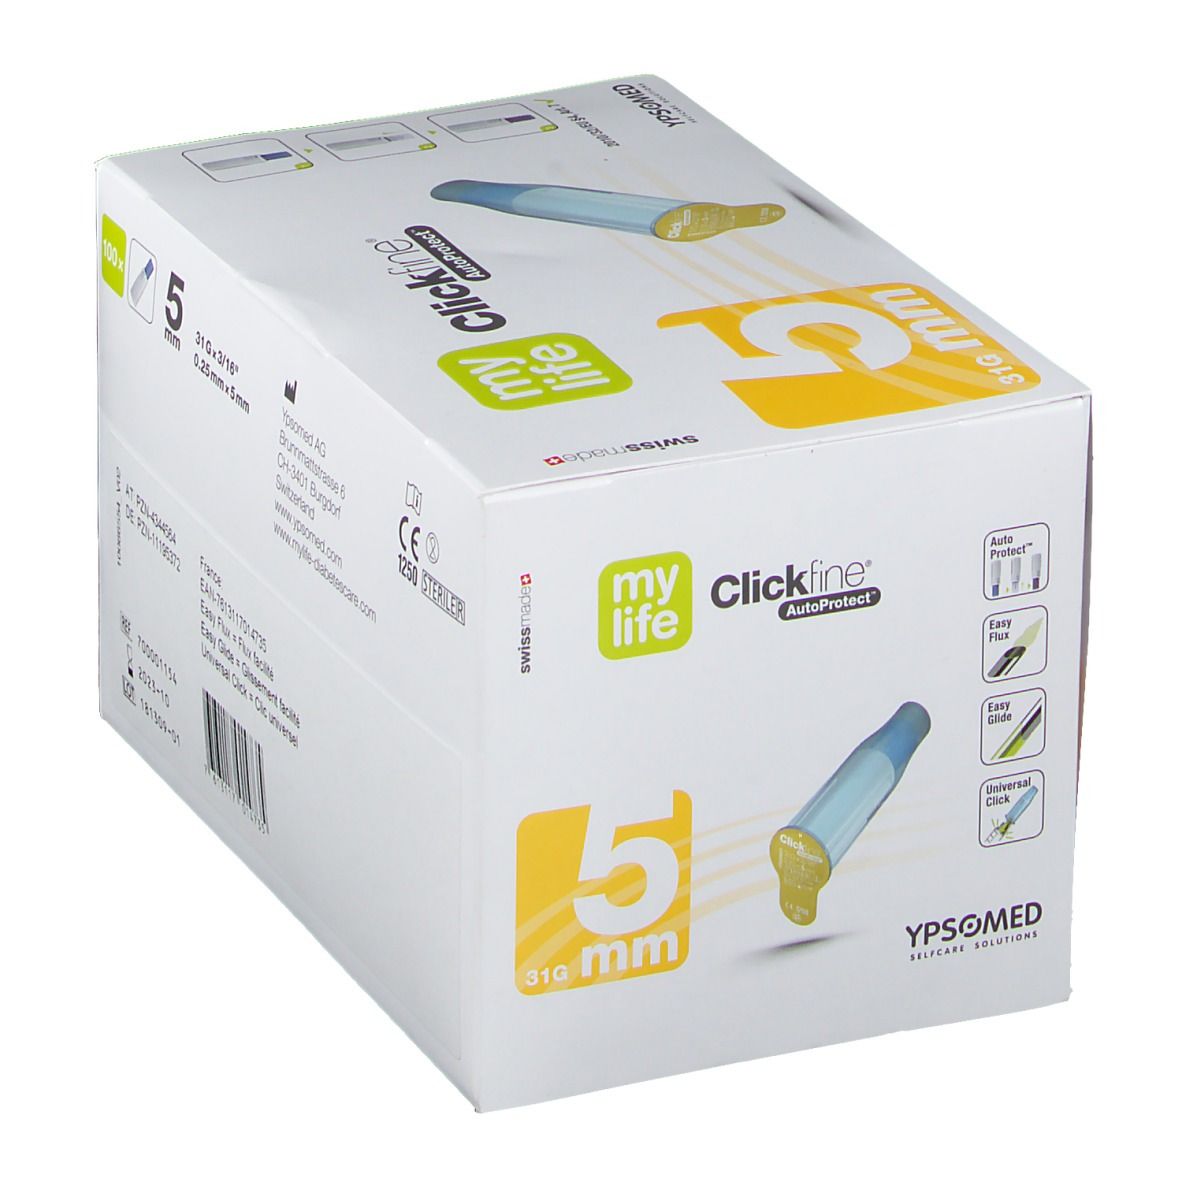 mylife Clickfine® AutoProtect 5 mm